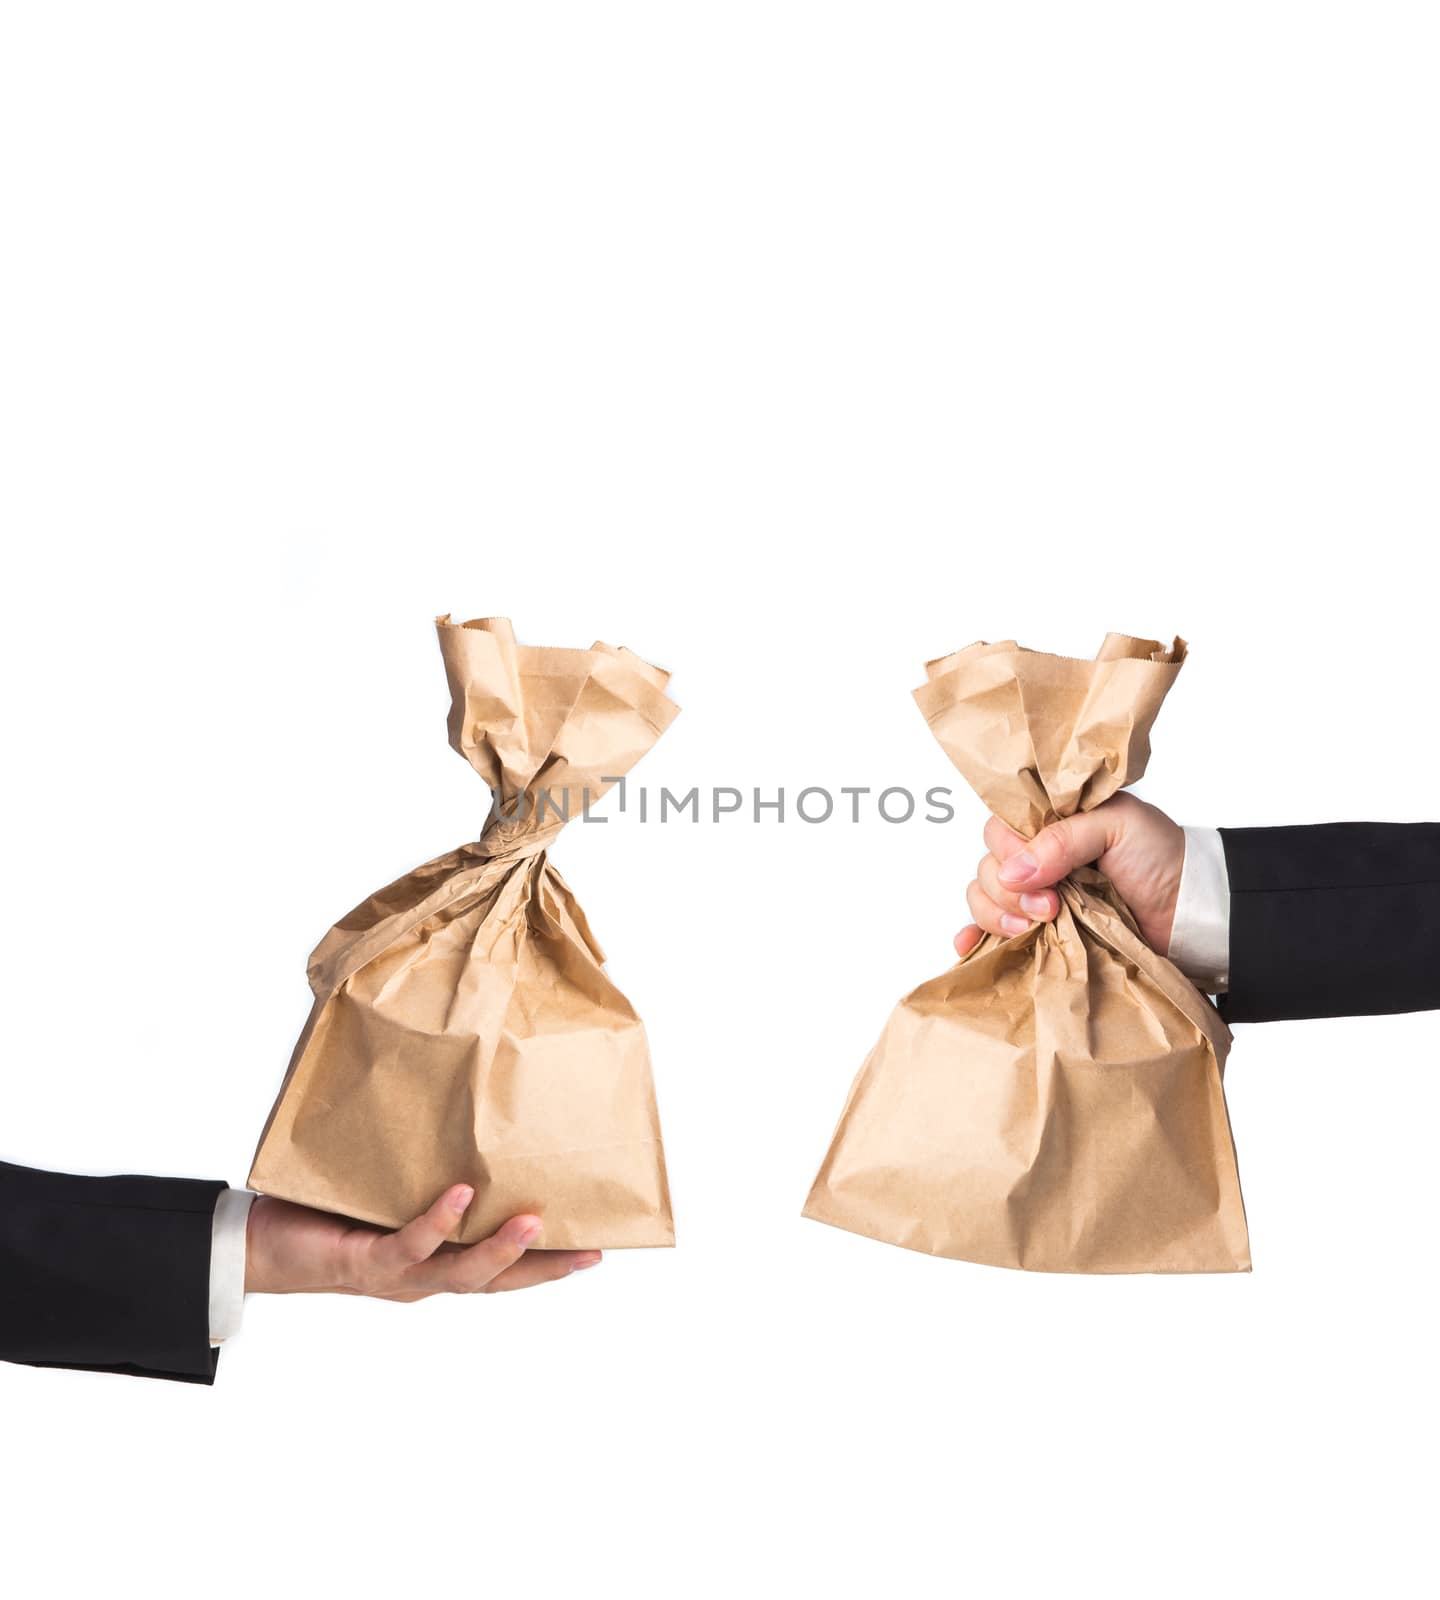 Man holding a brown paper bag by tehcheesiong